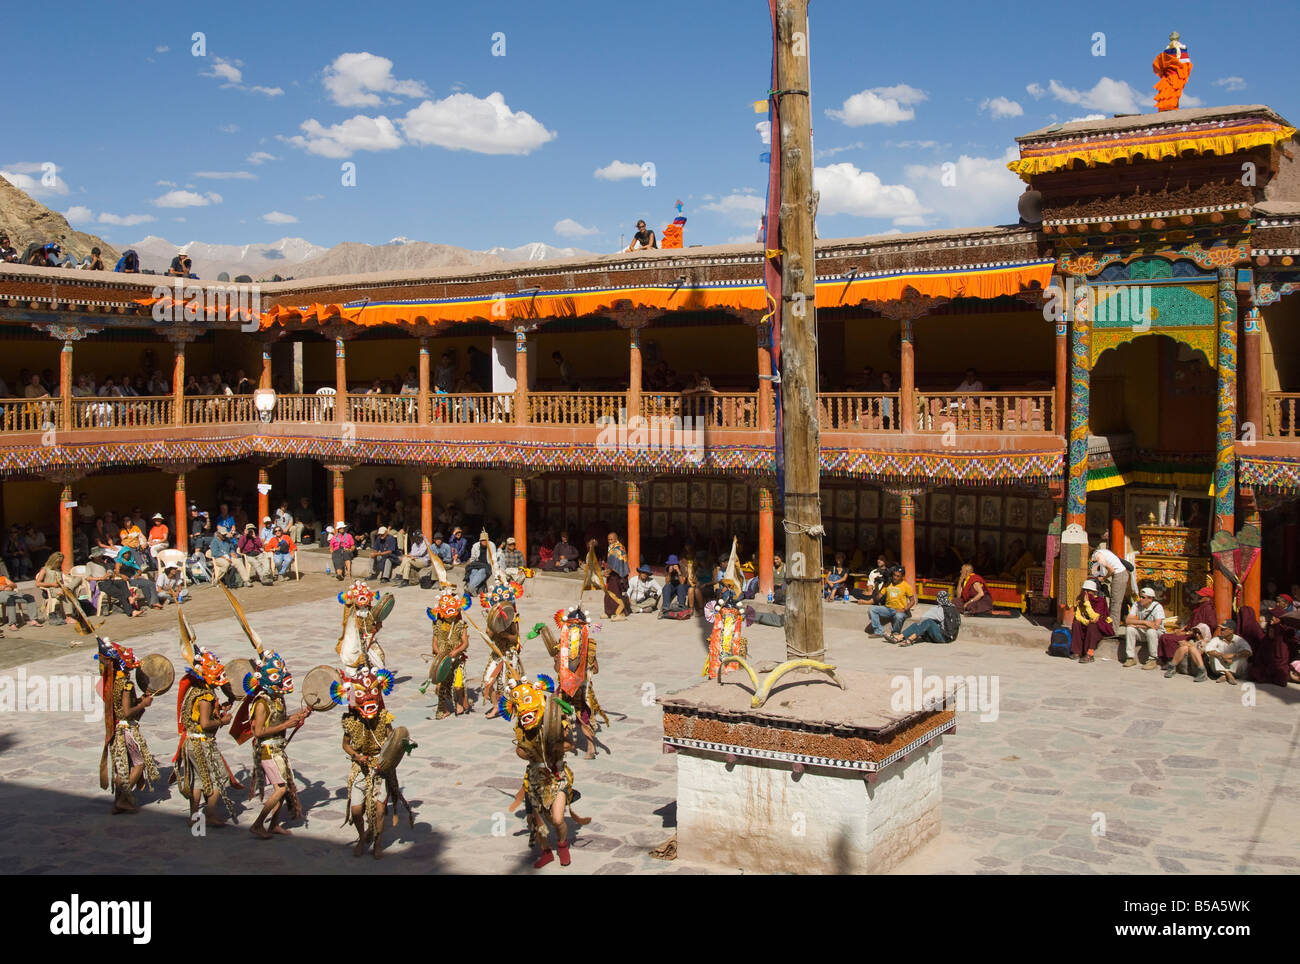 View from above of monastery courtyard with monks in traditional costumes dancing, Hemis Festival, Hemis, Ladakh, India Stock Photo